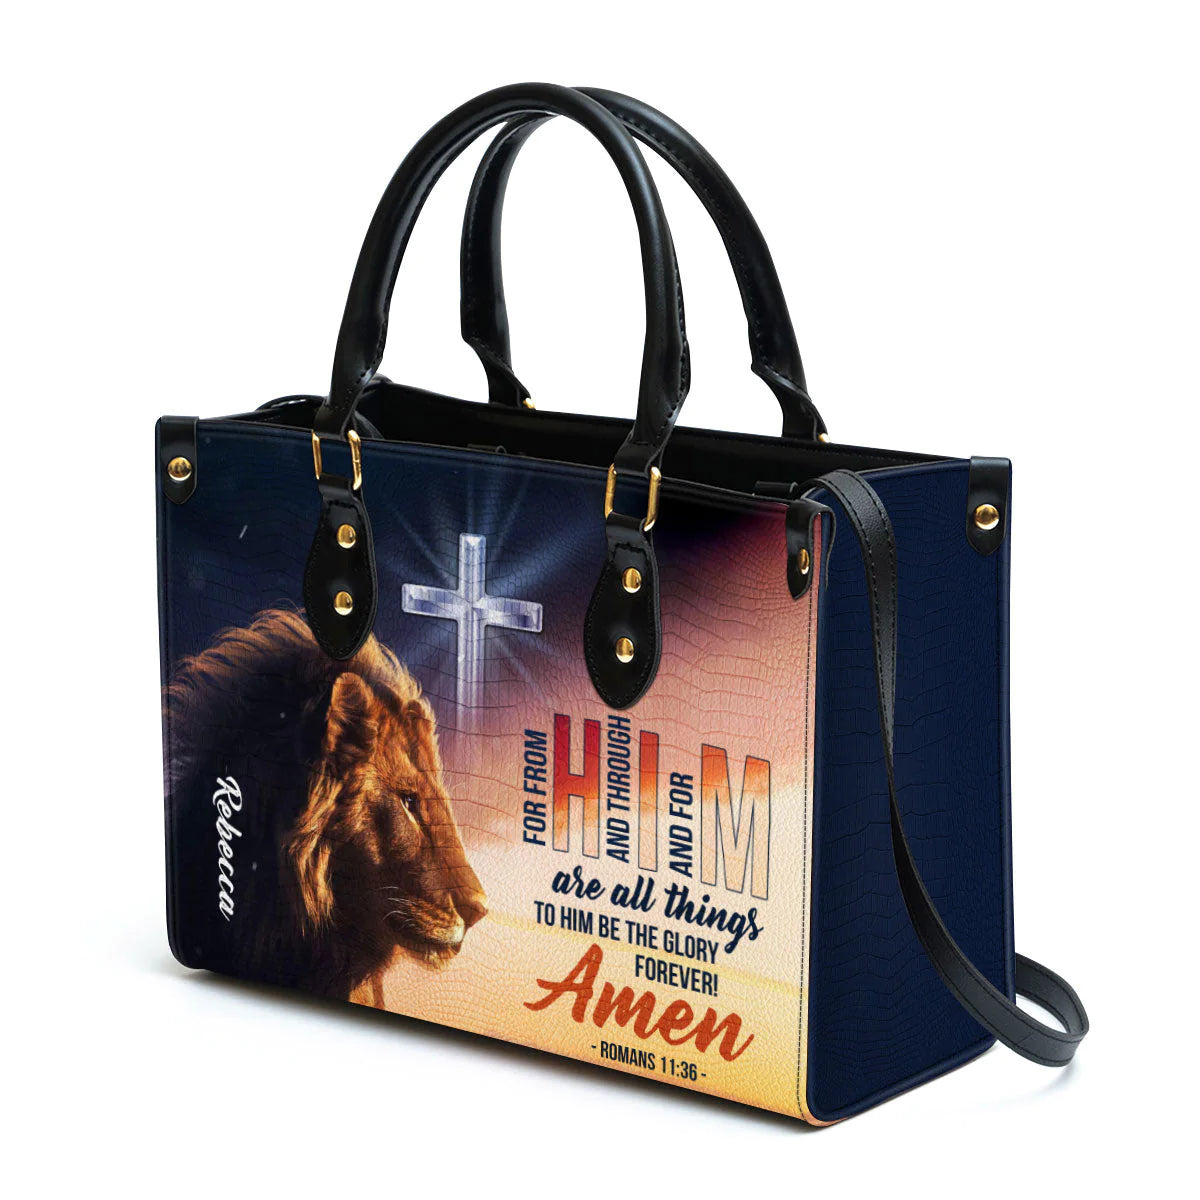 Christianartbag Handbag, To Him Be The Glory Forever, Personalized Gifts, Gifts for Women, Christmas Gift. - Christian Art Bag